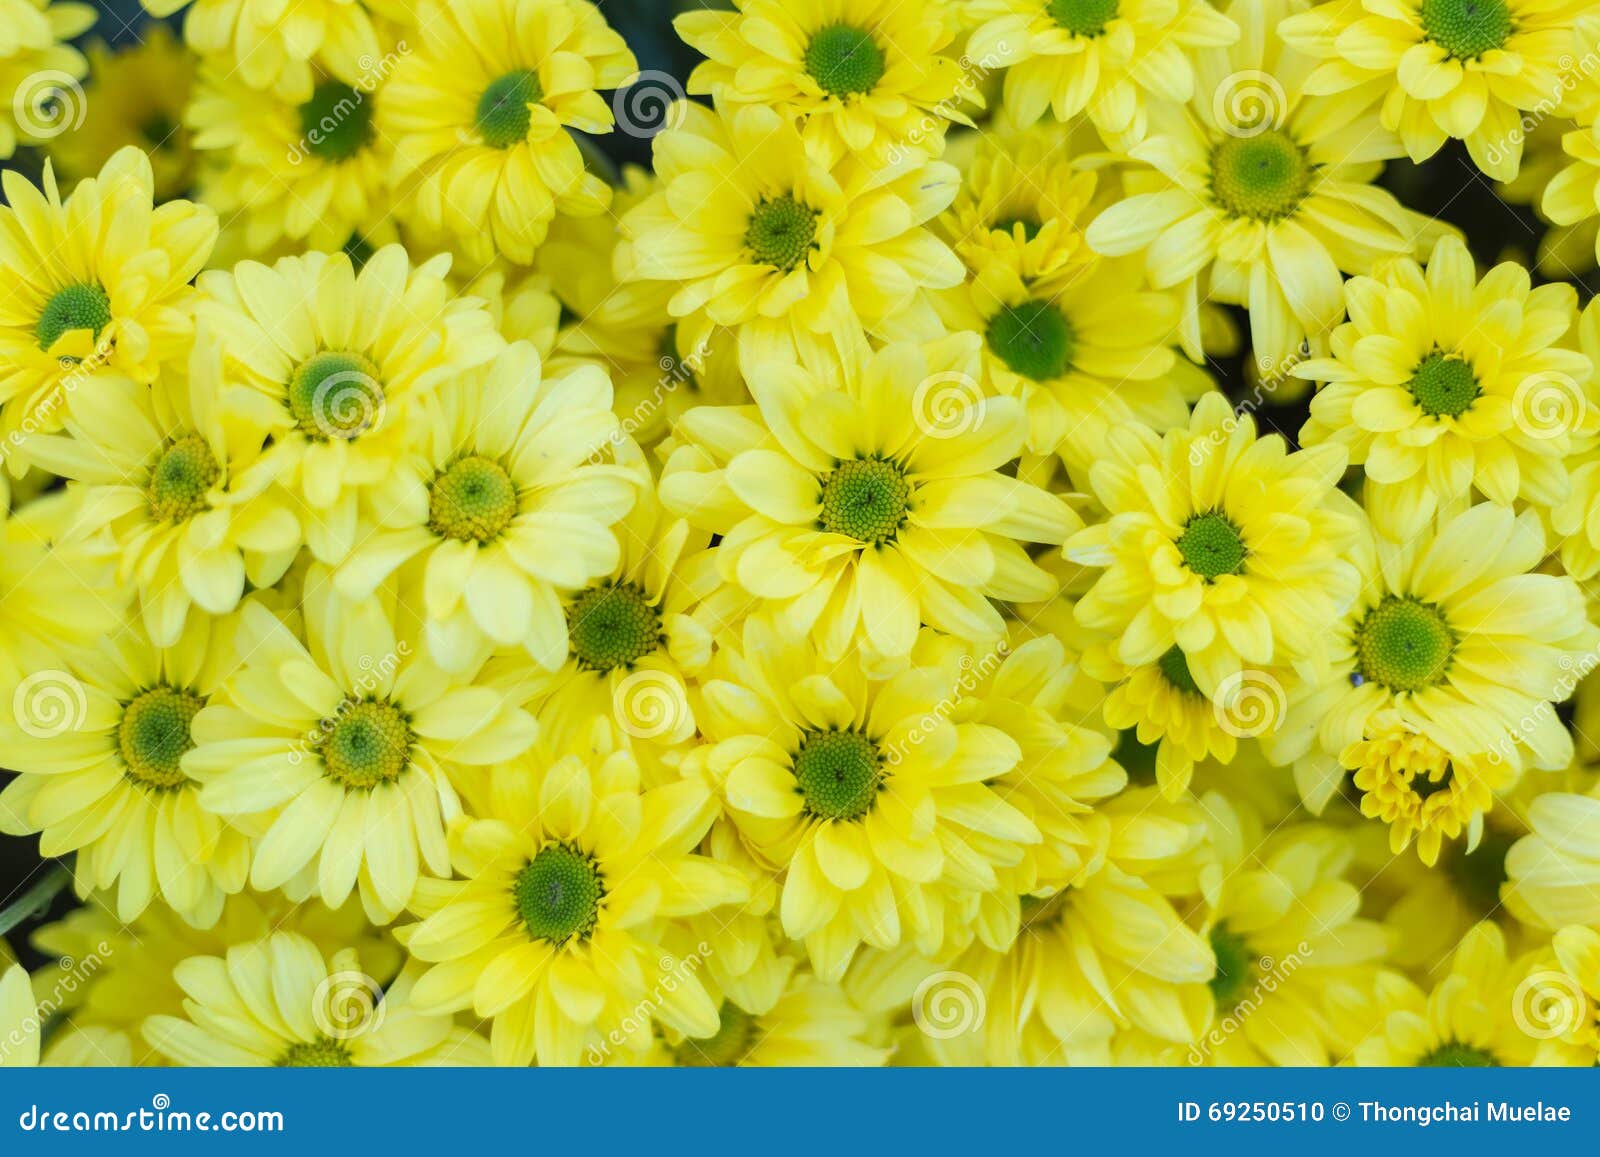 Pattern Flower Wall Texture for Background Stock Photo - Image of